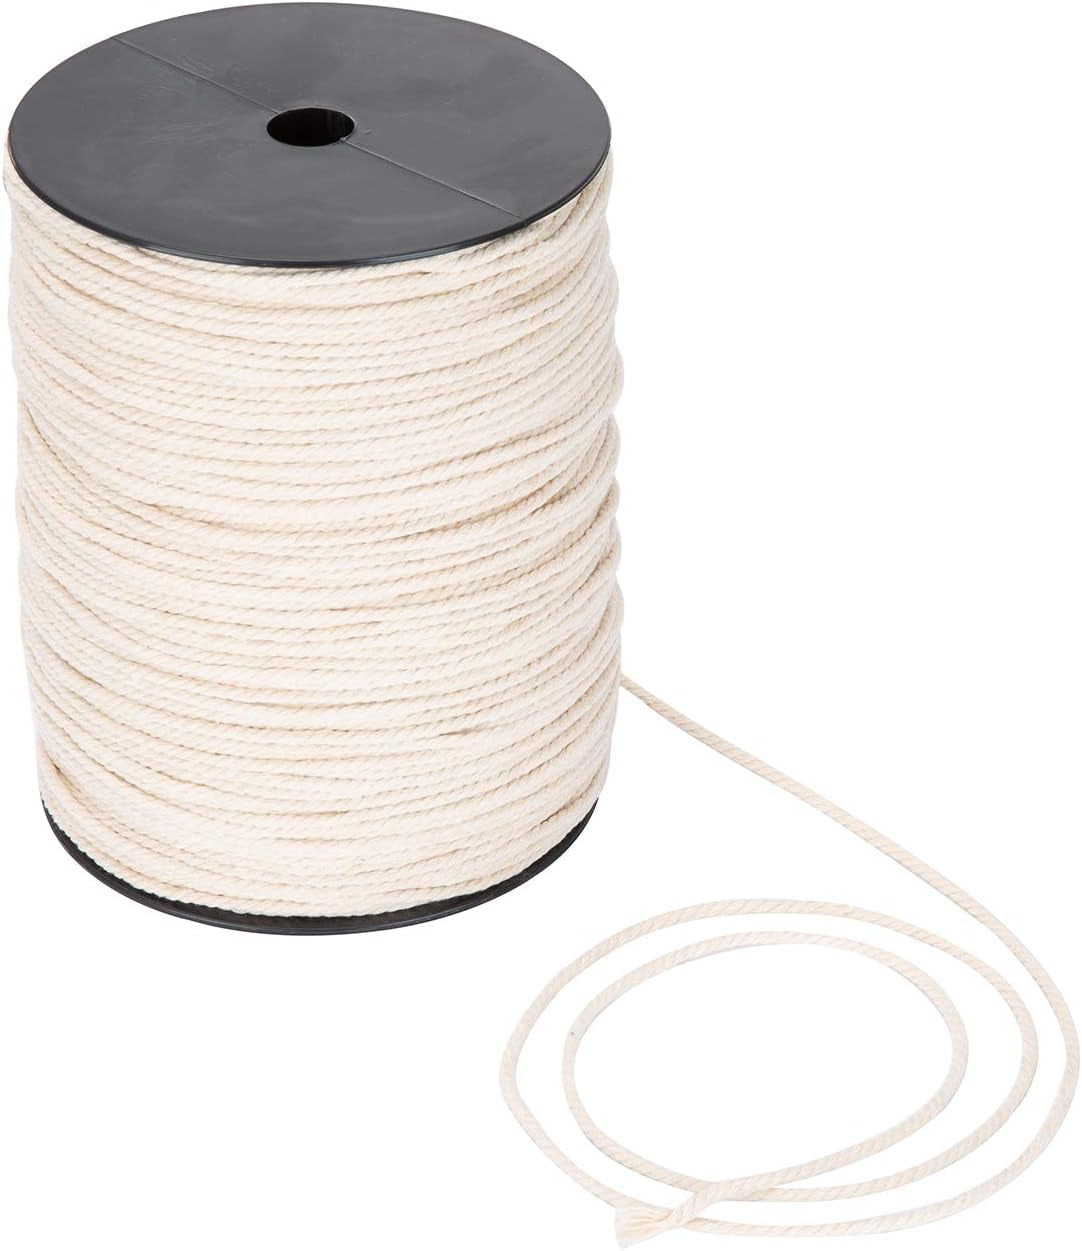 Macrame Cord 4Mm X 240Yd | 100% Natual Cotton Macrame Rope | 3 Strand Twisted Cotton Cord for Handmade Plant Hanger Wall Hanging Craft Making